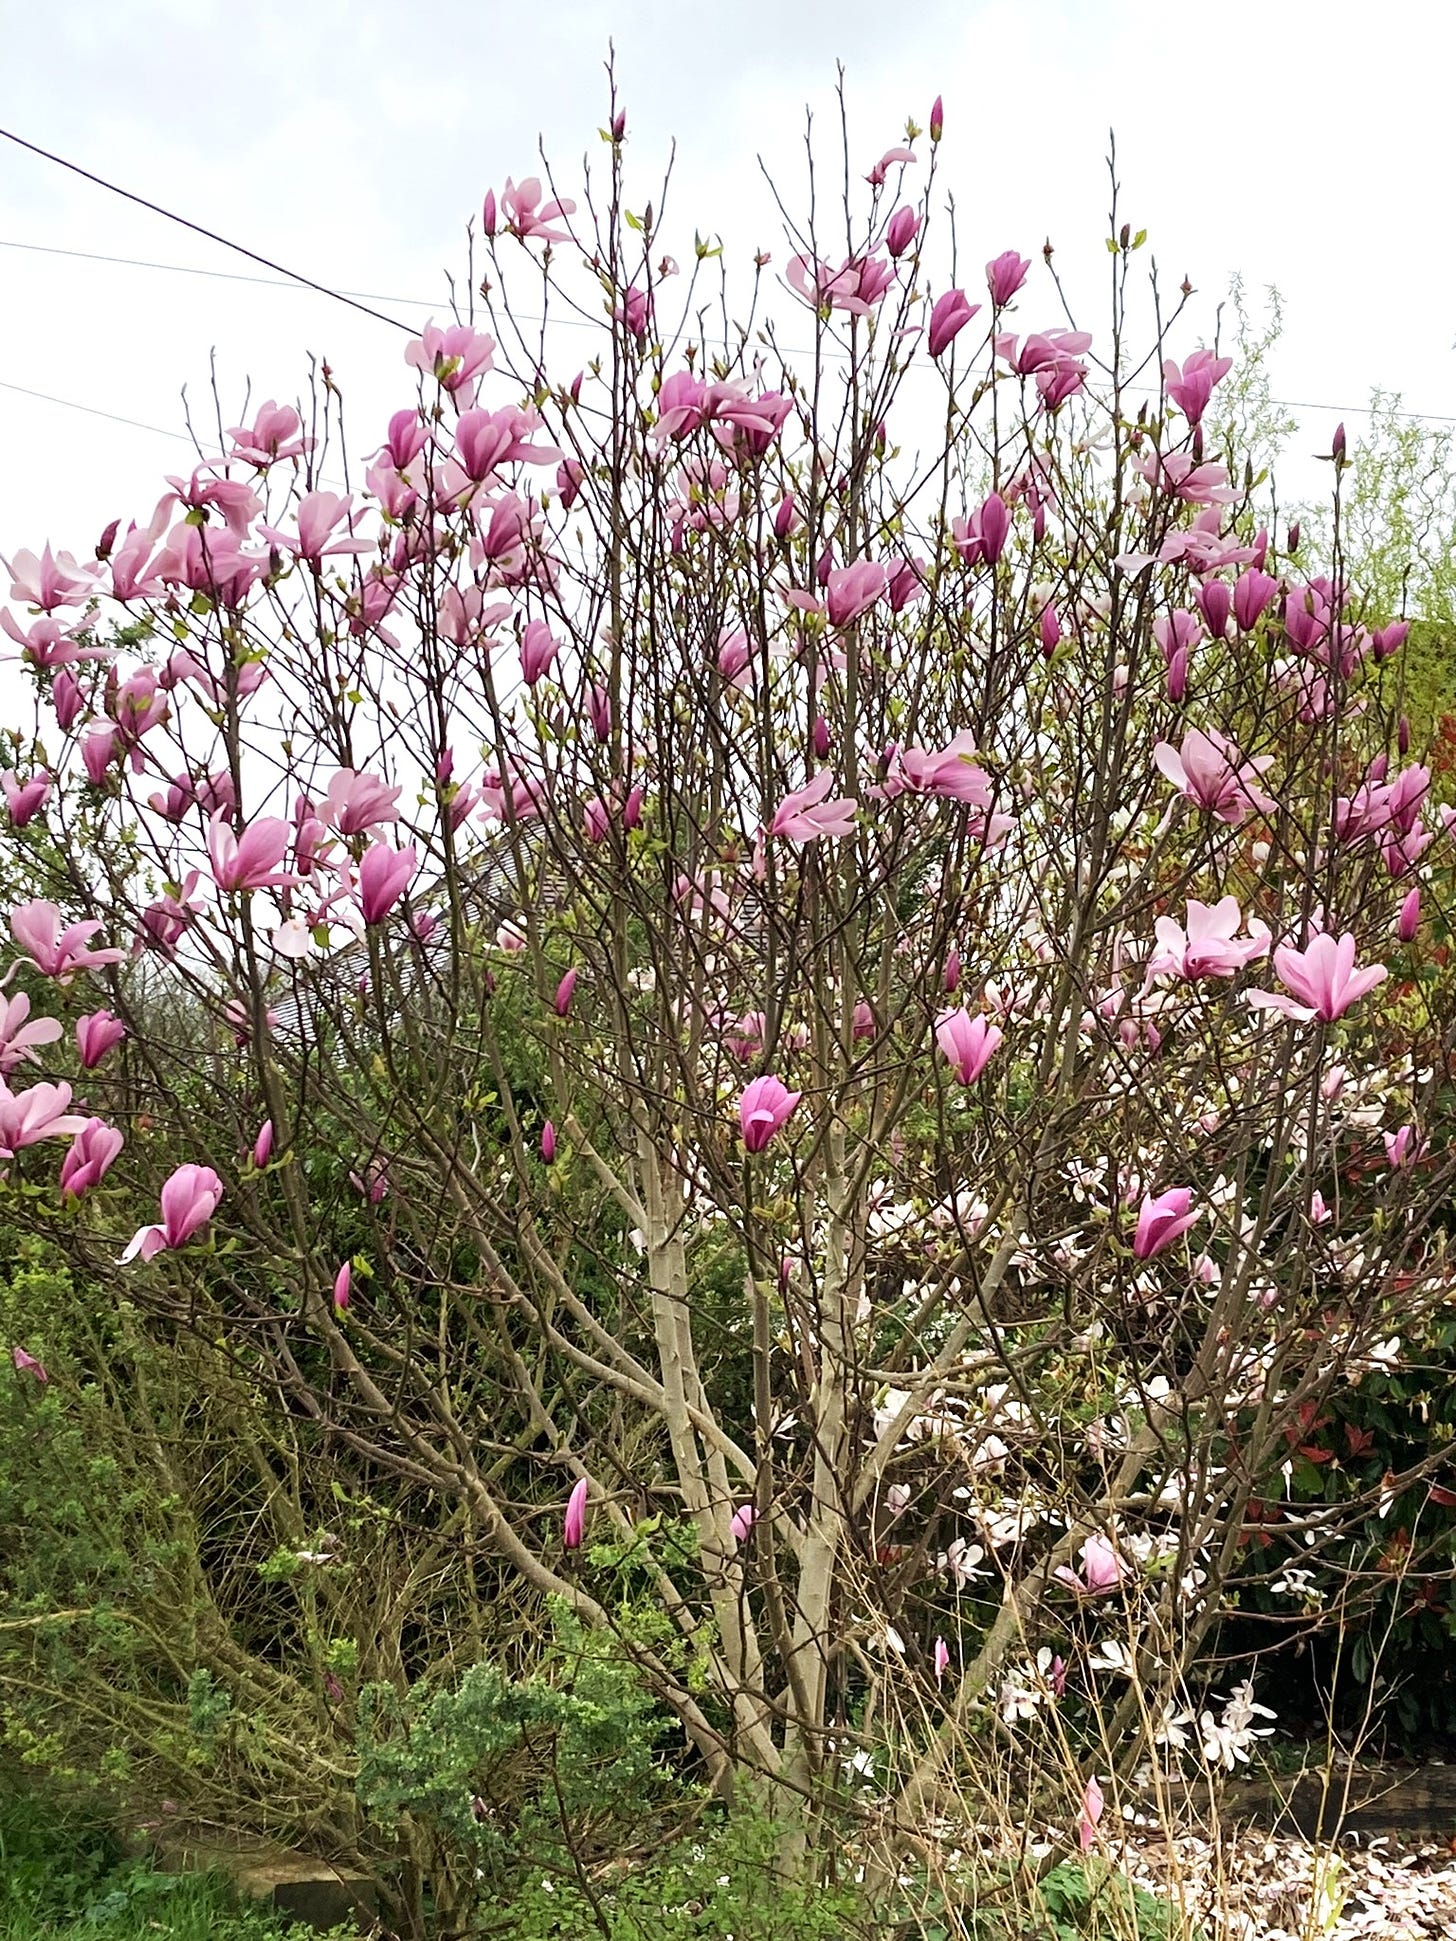 A magnolia tree takes up most of this photo. It is covered in pink flowers with green leaf buds beginning to also show.